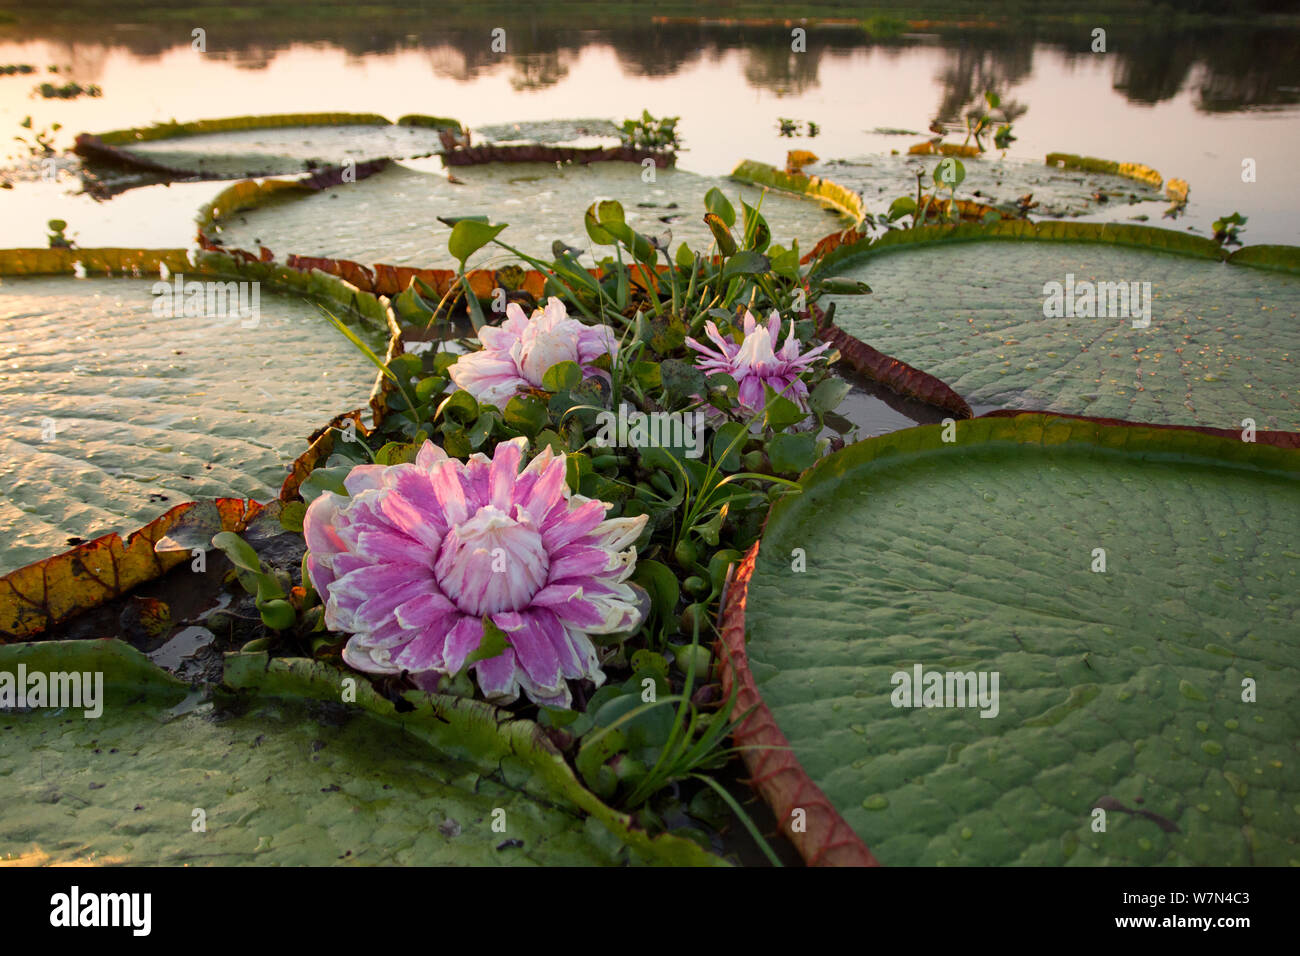 Giant water lily (Victoria cruziana) Pantanal, Matogrossense National Park, Brazil. Flowers open at night to attract beetles to pollinate them. The flower is 10c warmer than its surroundings, this helps its scent to radiate. Stock Photo